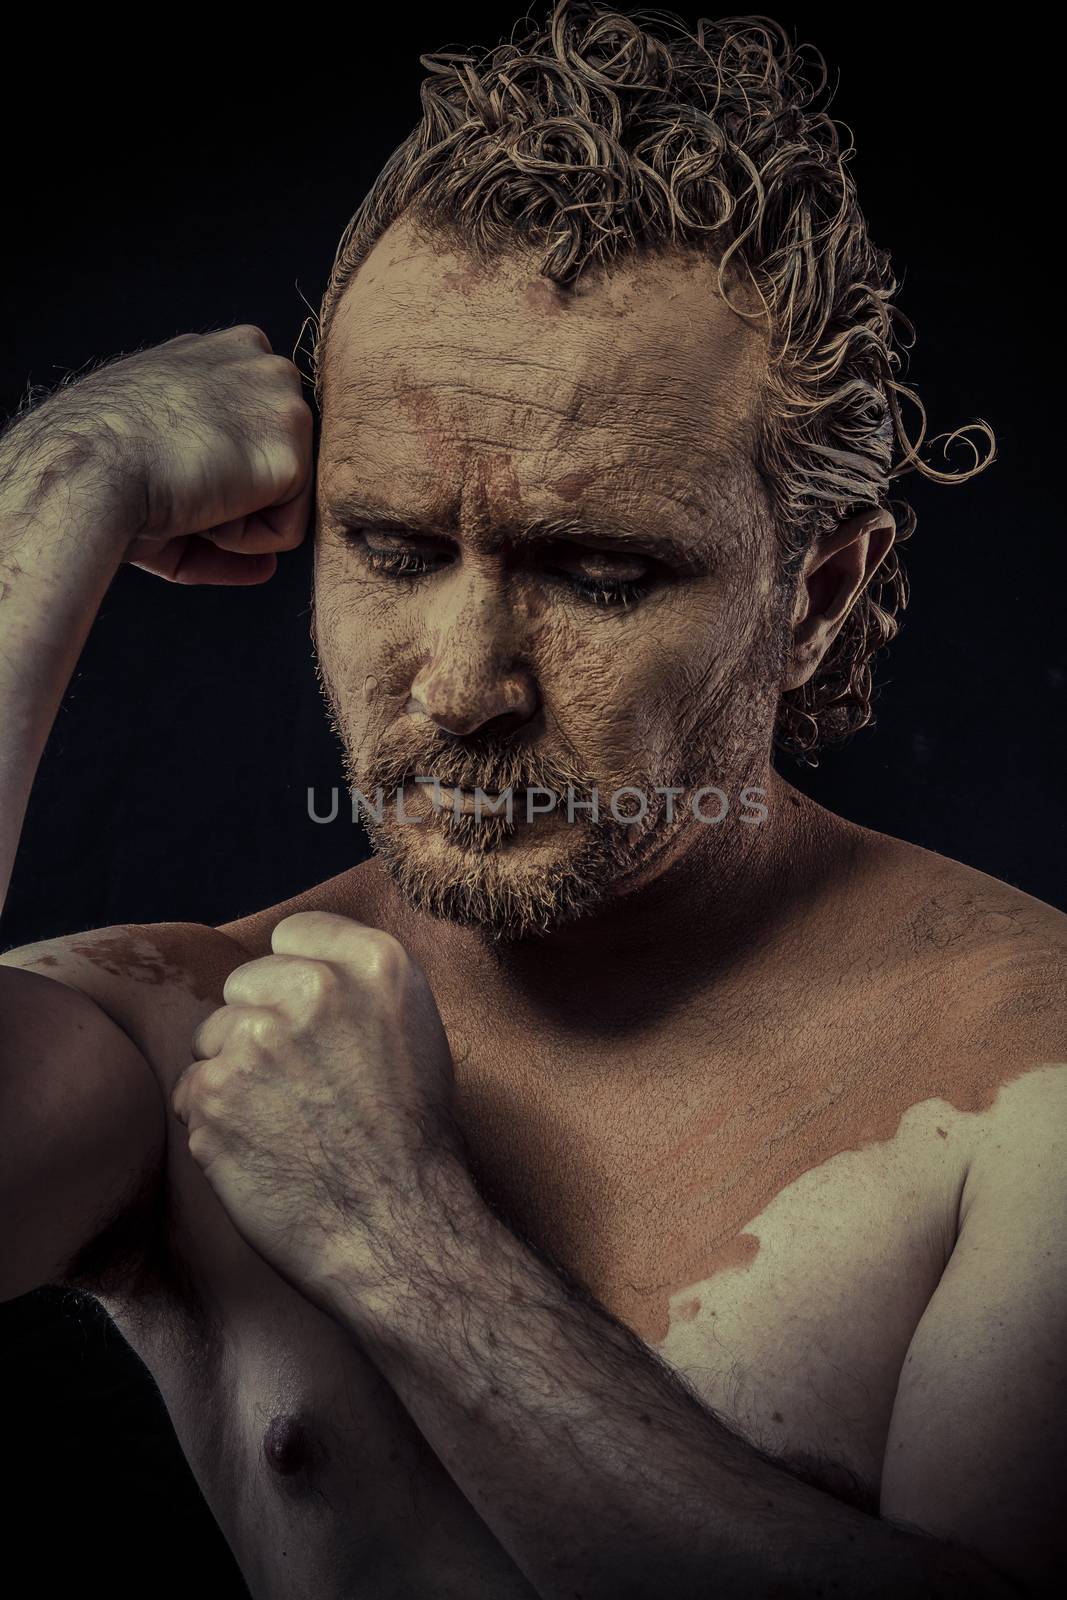 man with mud all over his body, naked, conceptual art